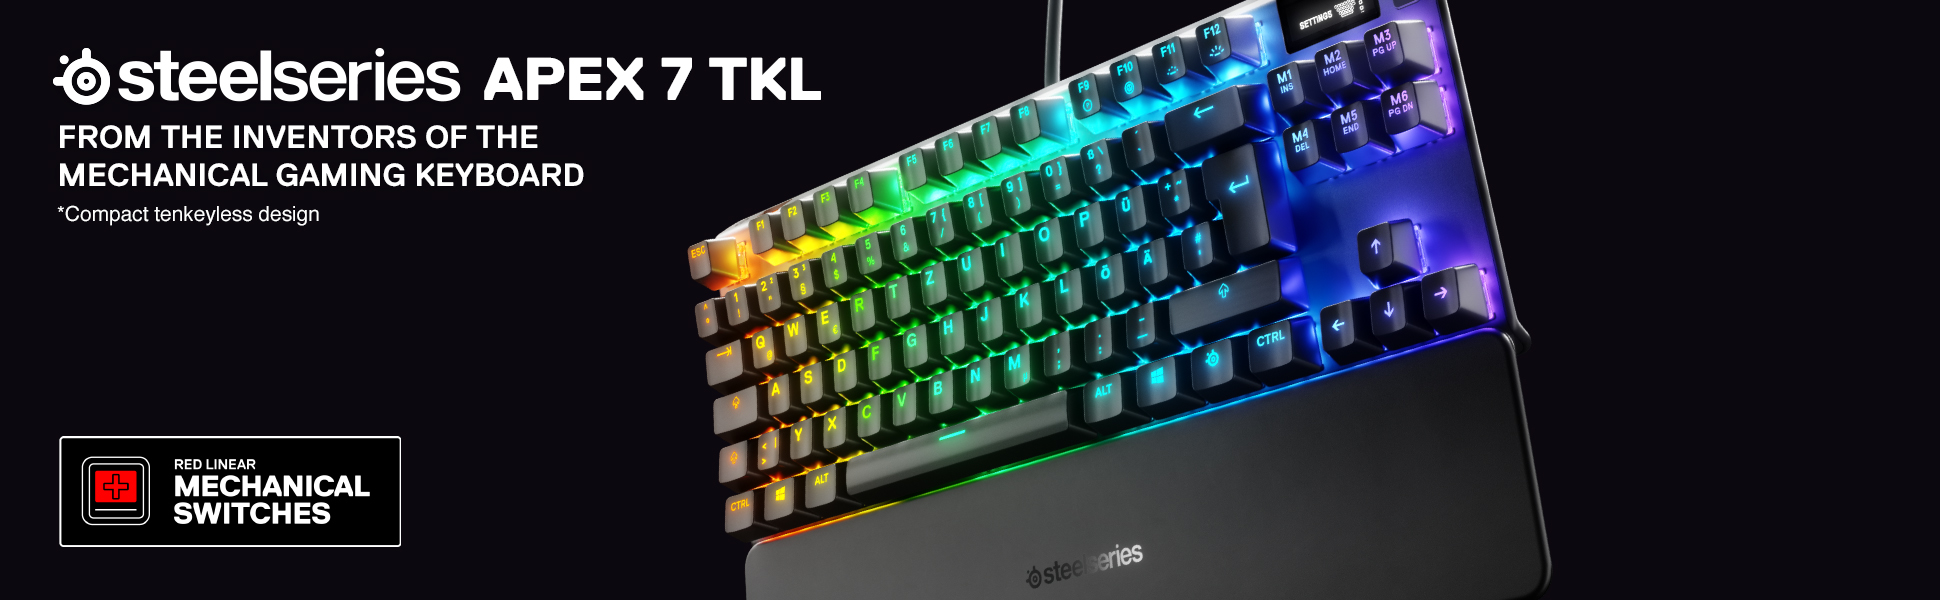 SteelSeries Apex 7 TKL Compact Mechanical Gaming Keyboard – OLED Smart  Display – USB Passthrough and Media Controls – Linear and Quiet – RGB  Backlit